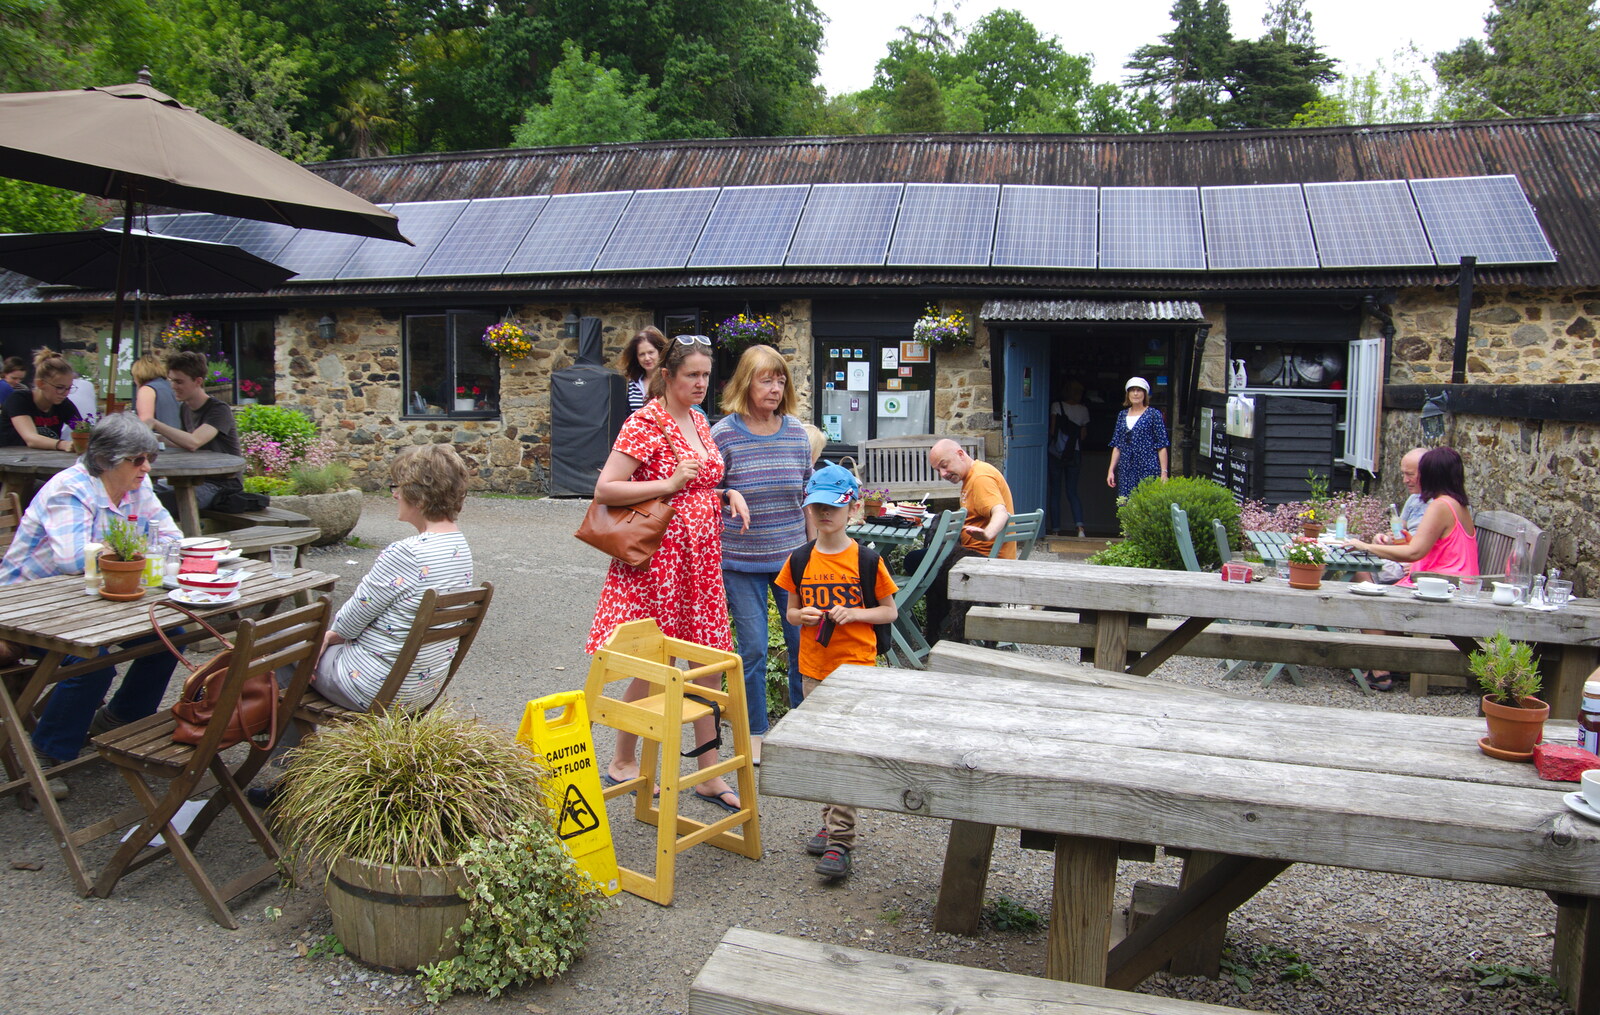 Chagford Lido and a Trip to Parke, Bovey Tracey, Devon - 25th May 2019: In the café courtyard